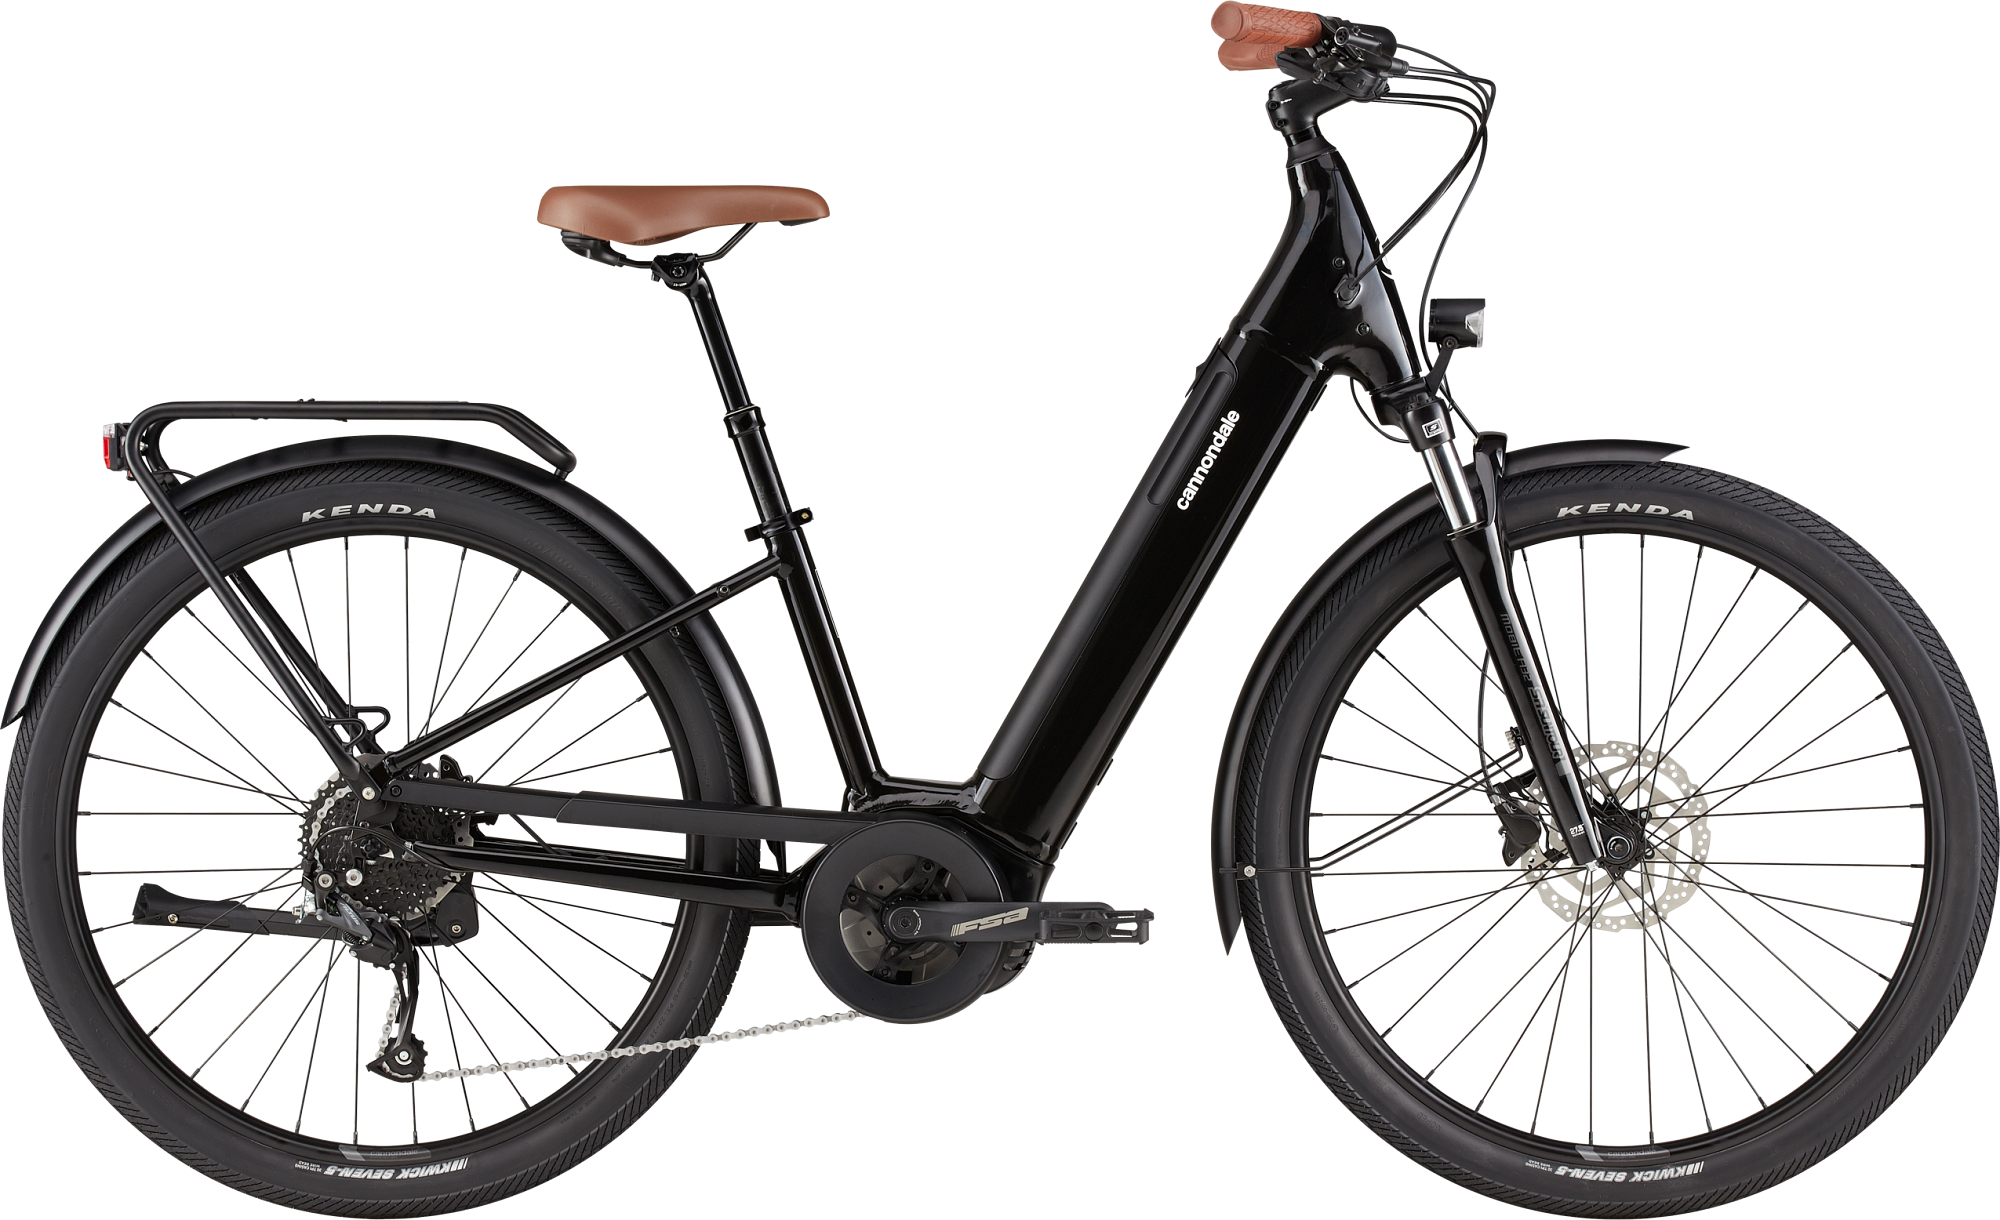 Black Electric Bike for Adults and Beginner, Ebike for Kids & Youth Ages 7+ Years, Fat Tire Electric Bike